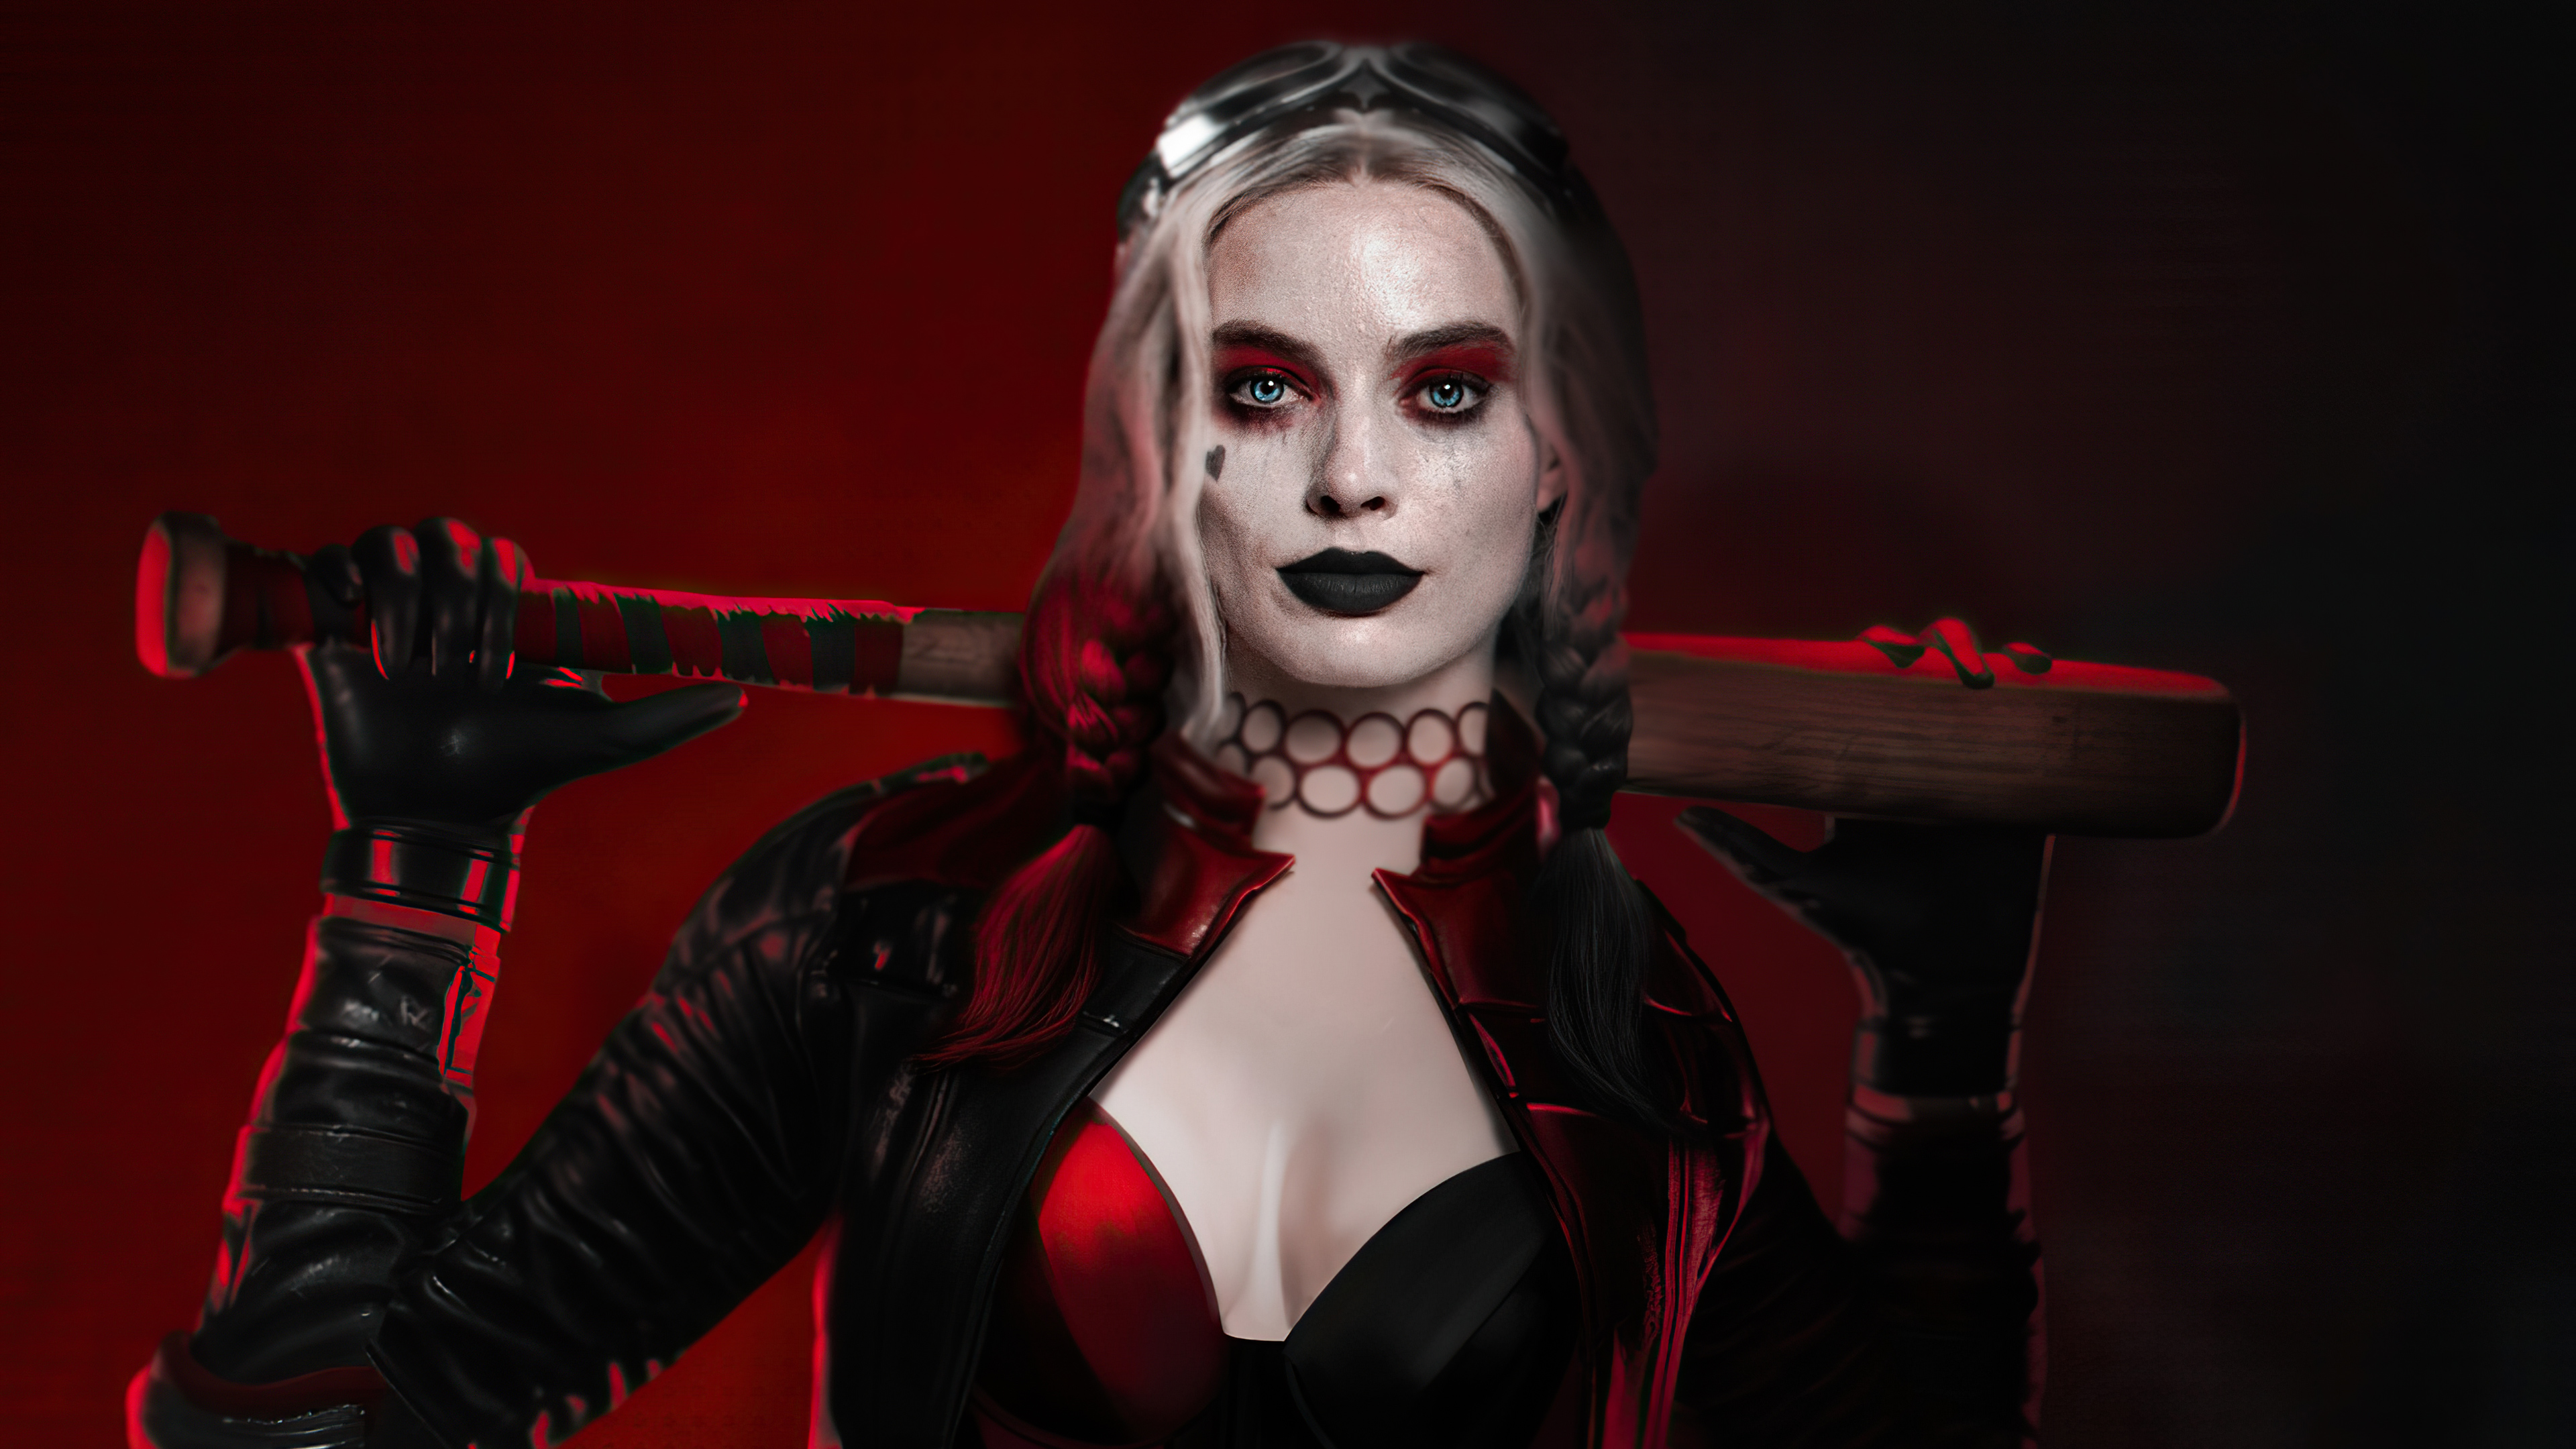 Harley Quinn from Suicide Squad Wallpaper 4k Ultra HD ID:6232